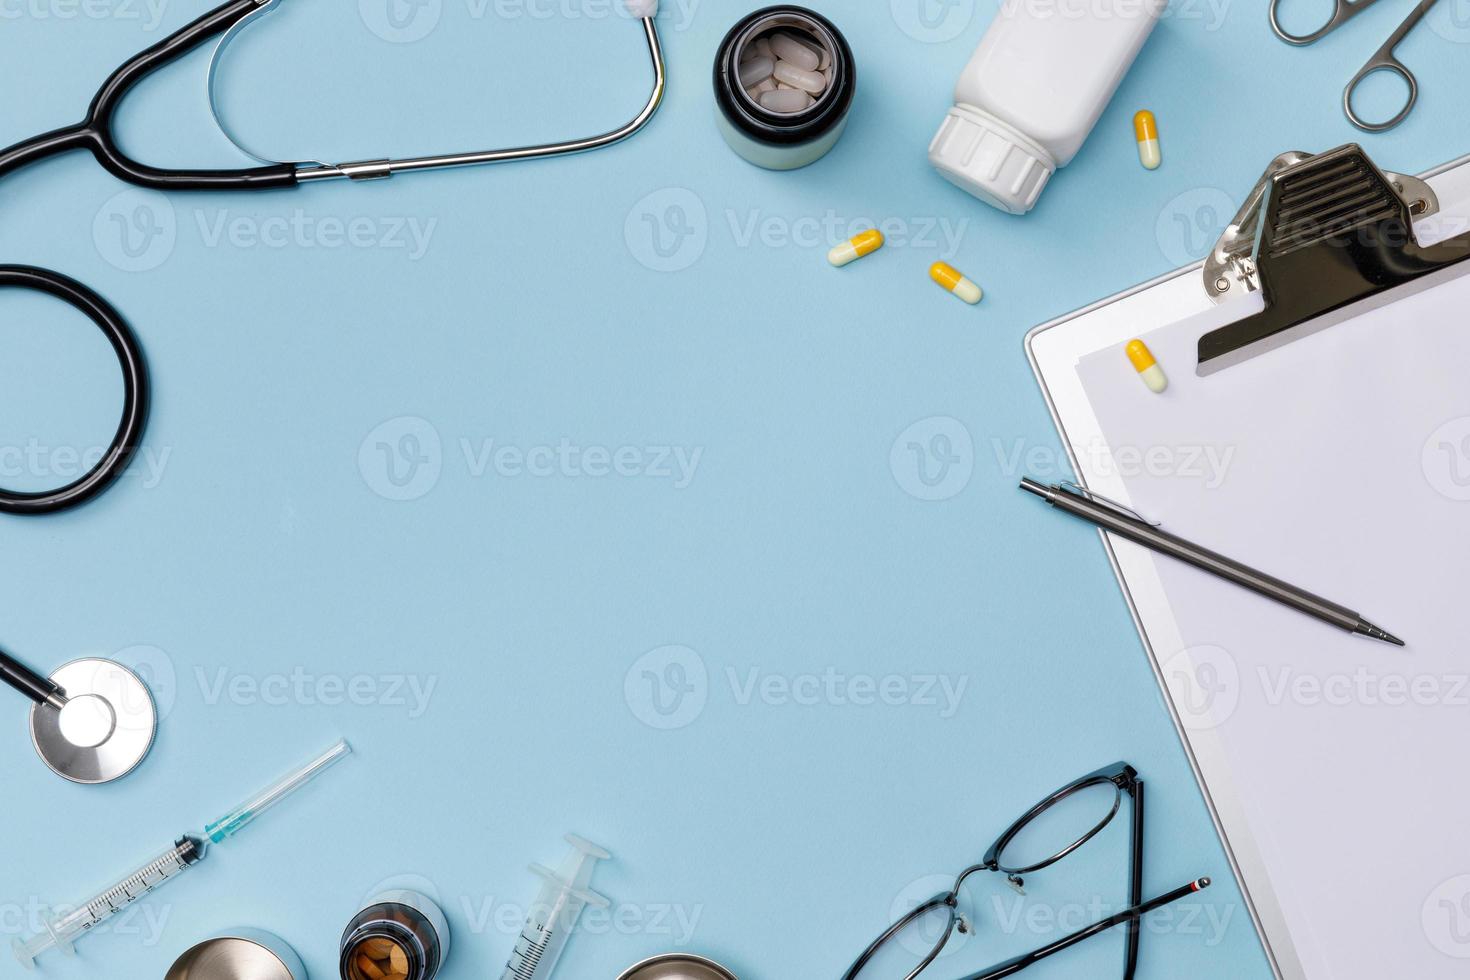 Creative flatlay of doctor medical equipment blue table with stethoscope, medical documents, thermometer, syringe and pills, Health care concept, Top view with copy space, Isolated on blue photo